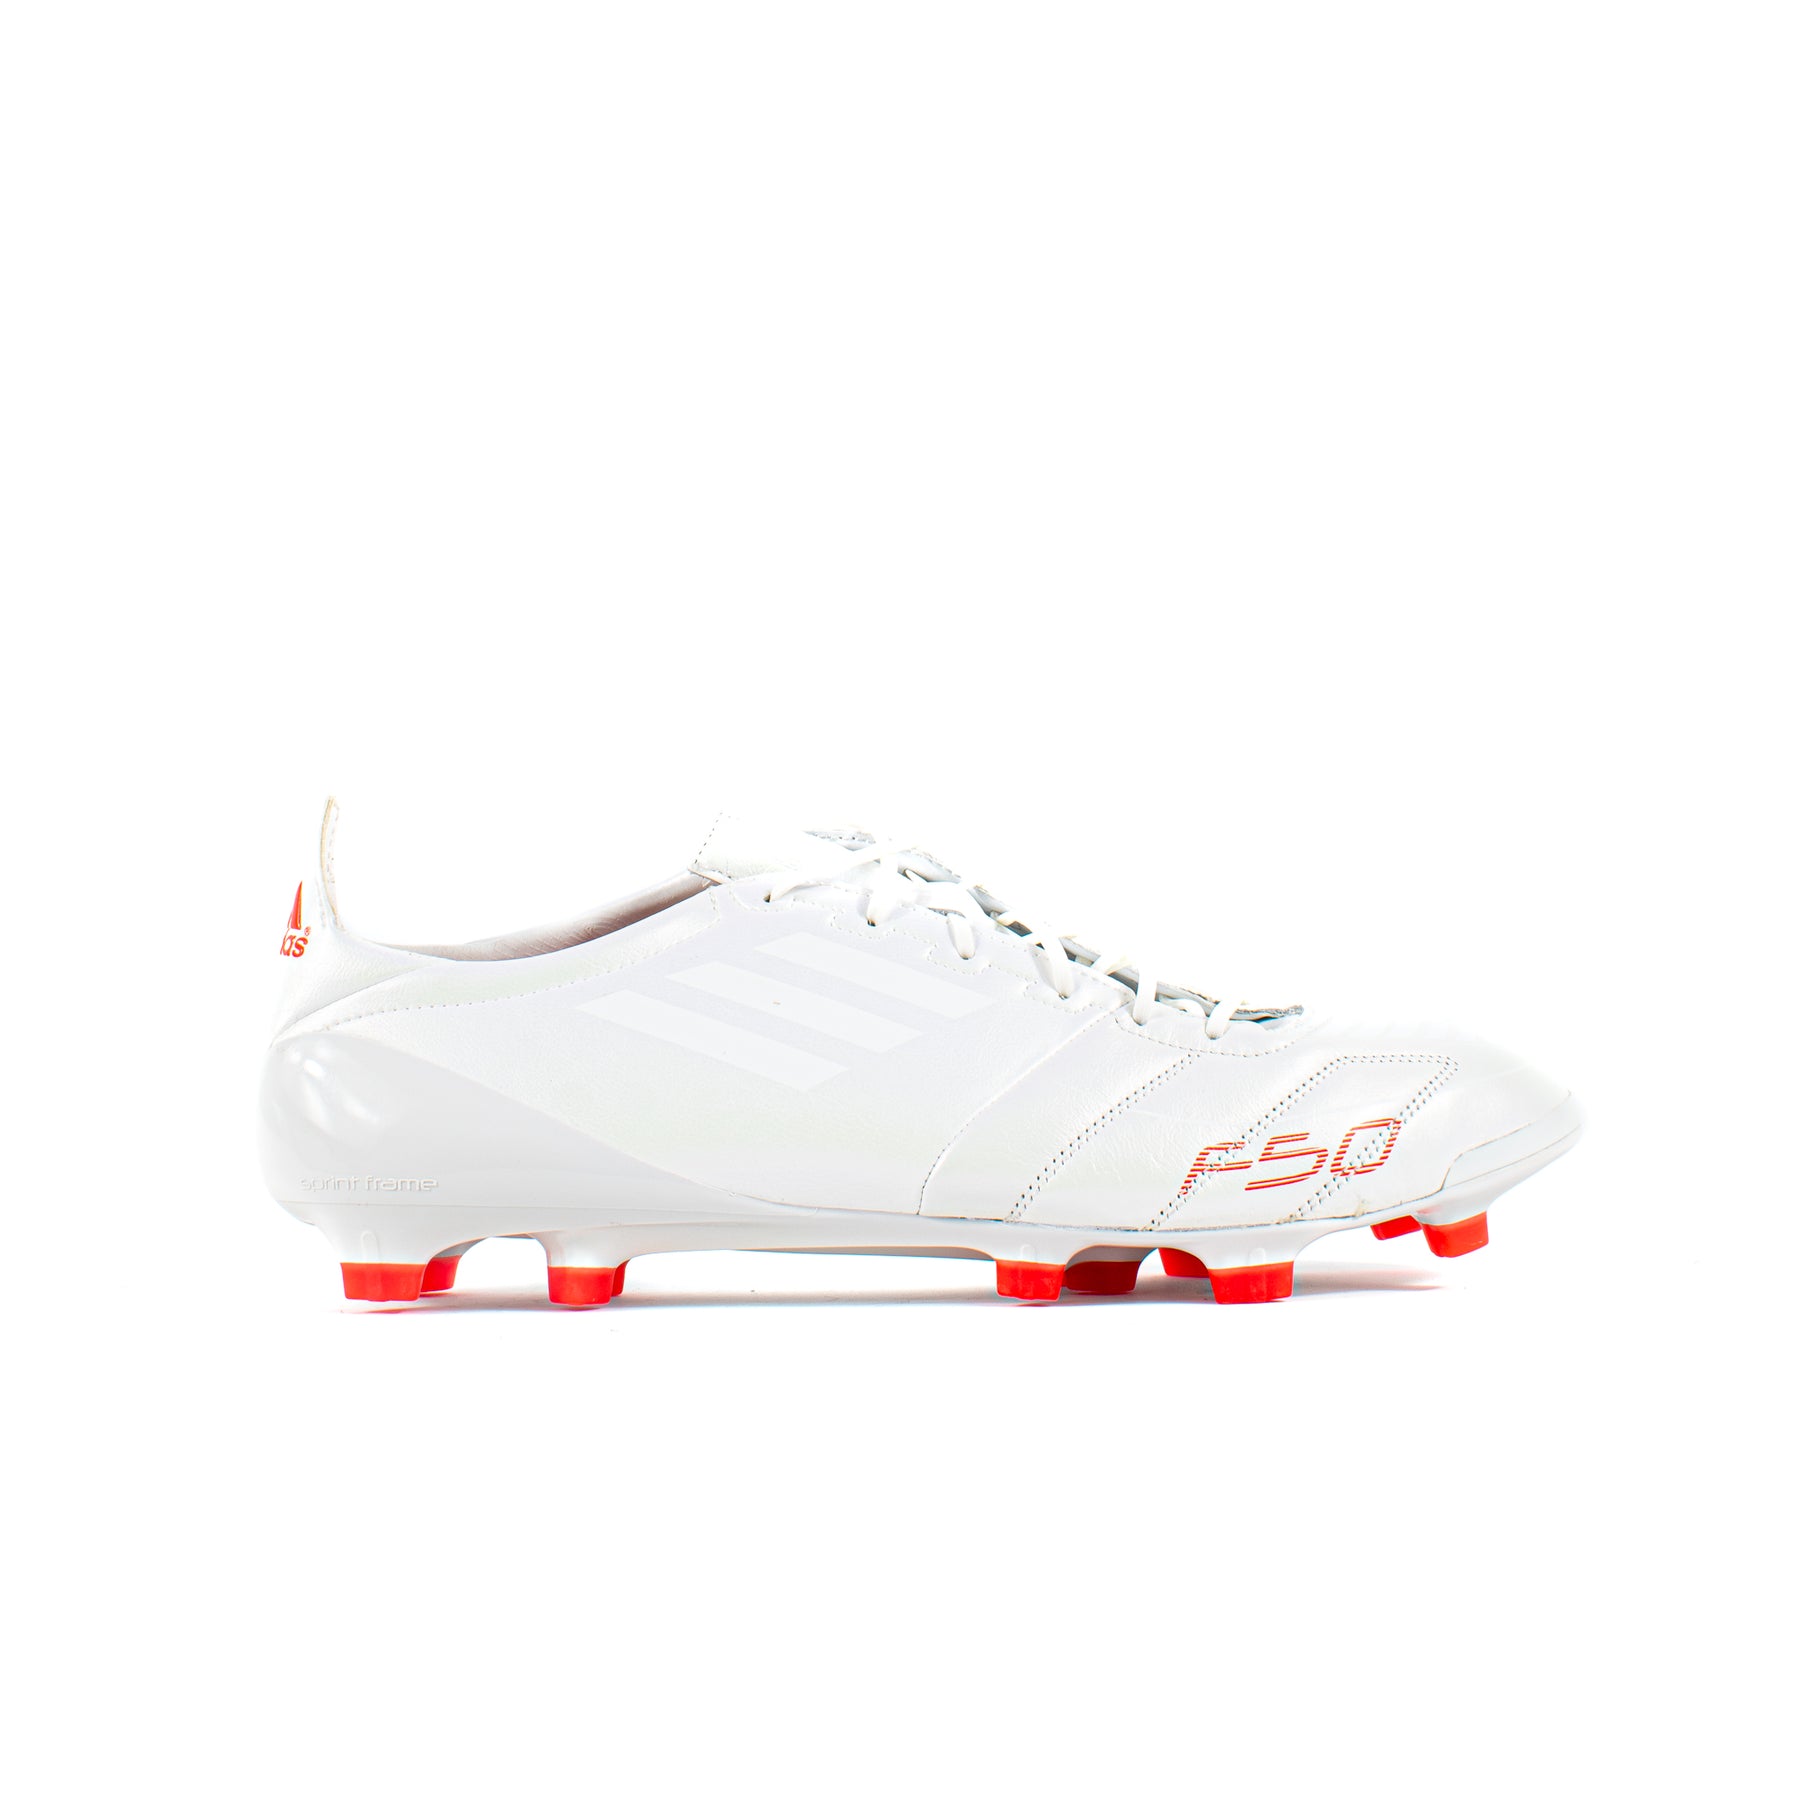 Adidas Leather Whiteout FG – Classic Soccer Cleats